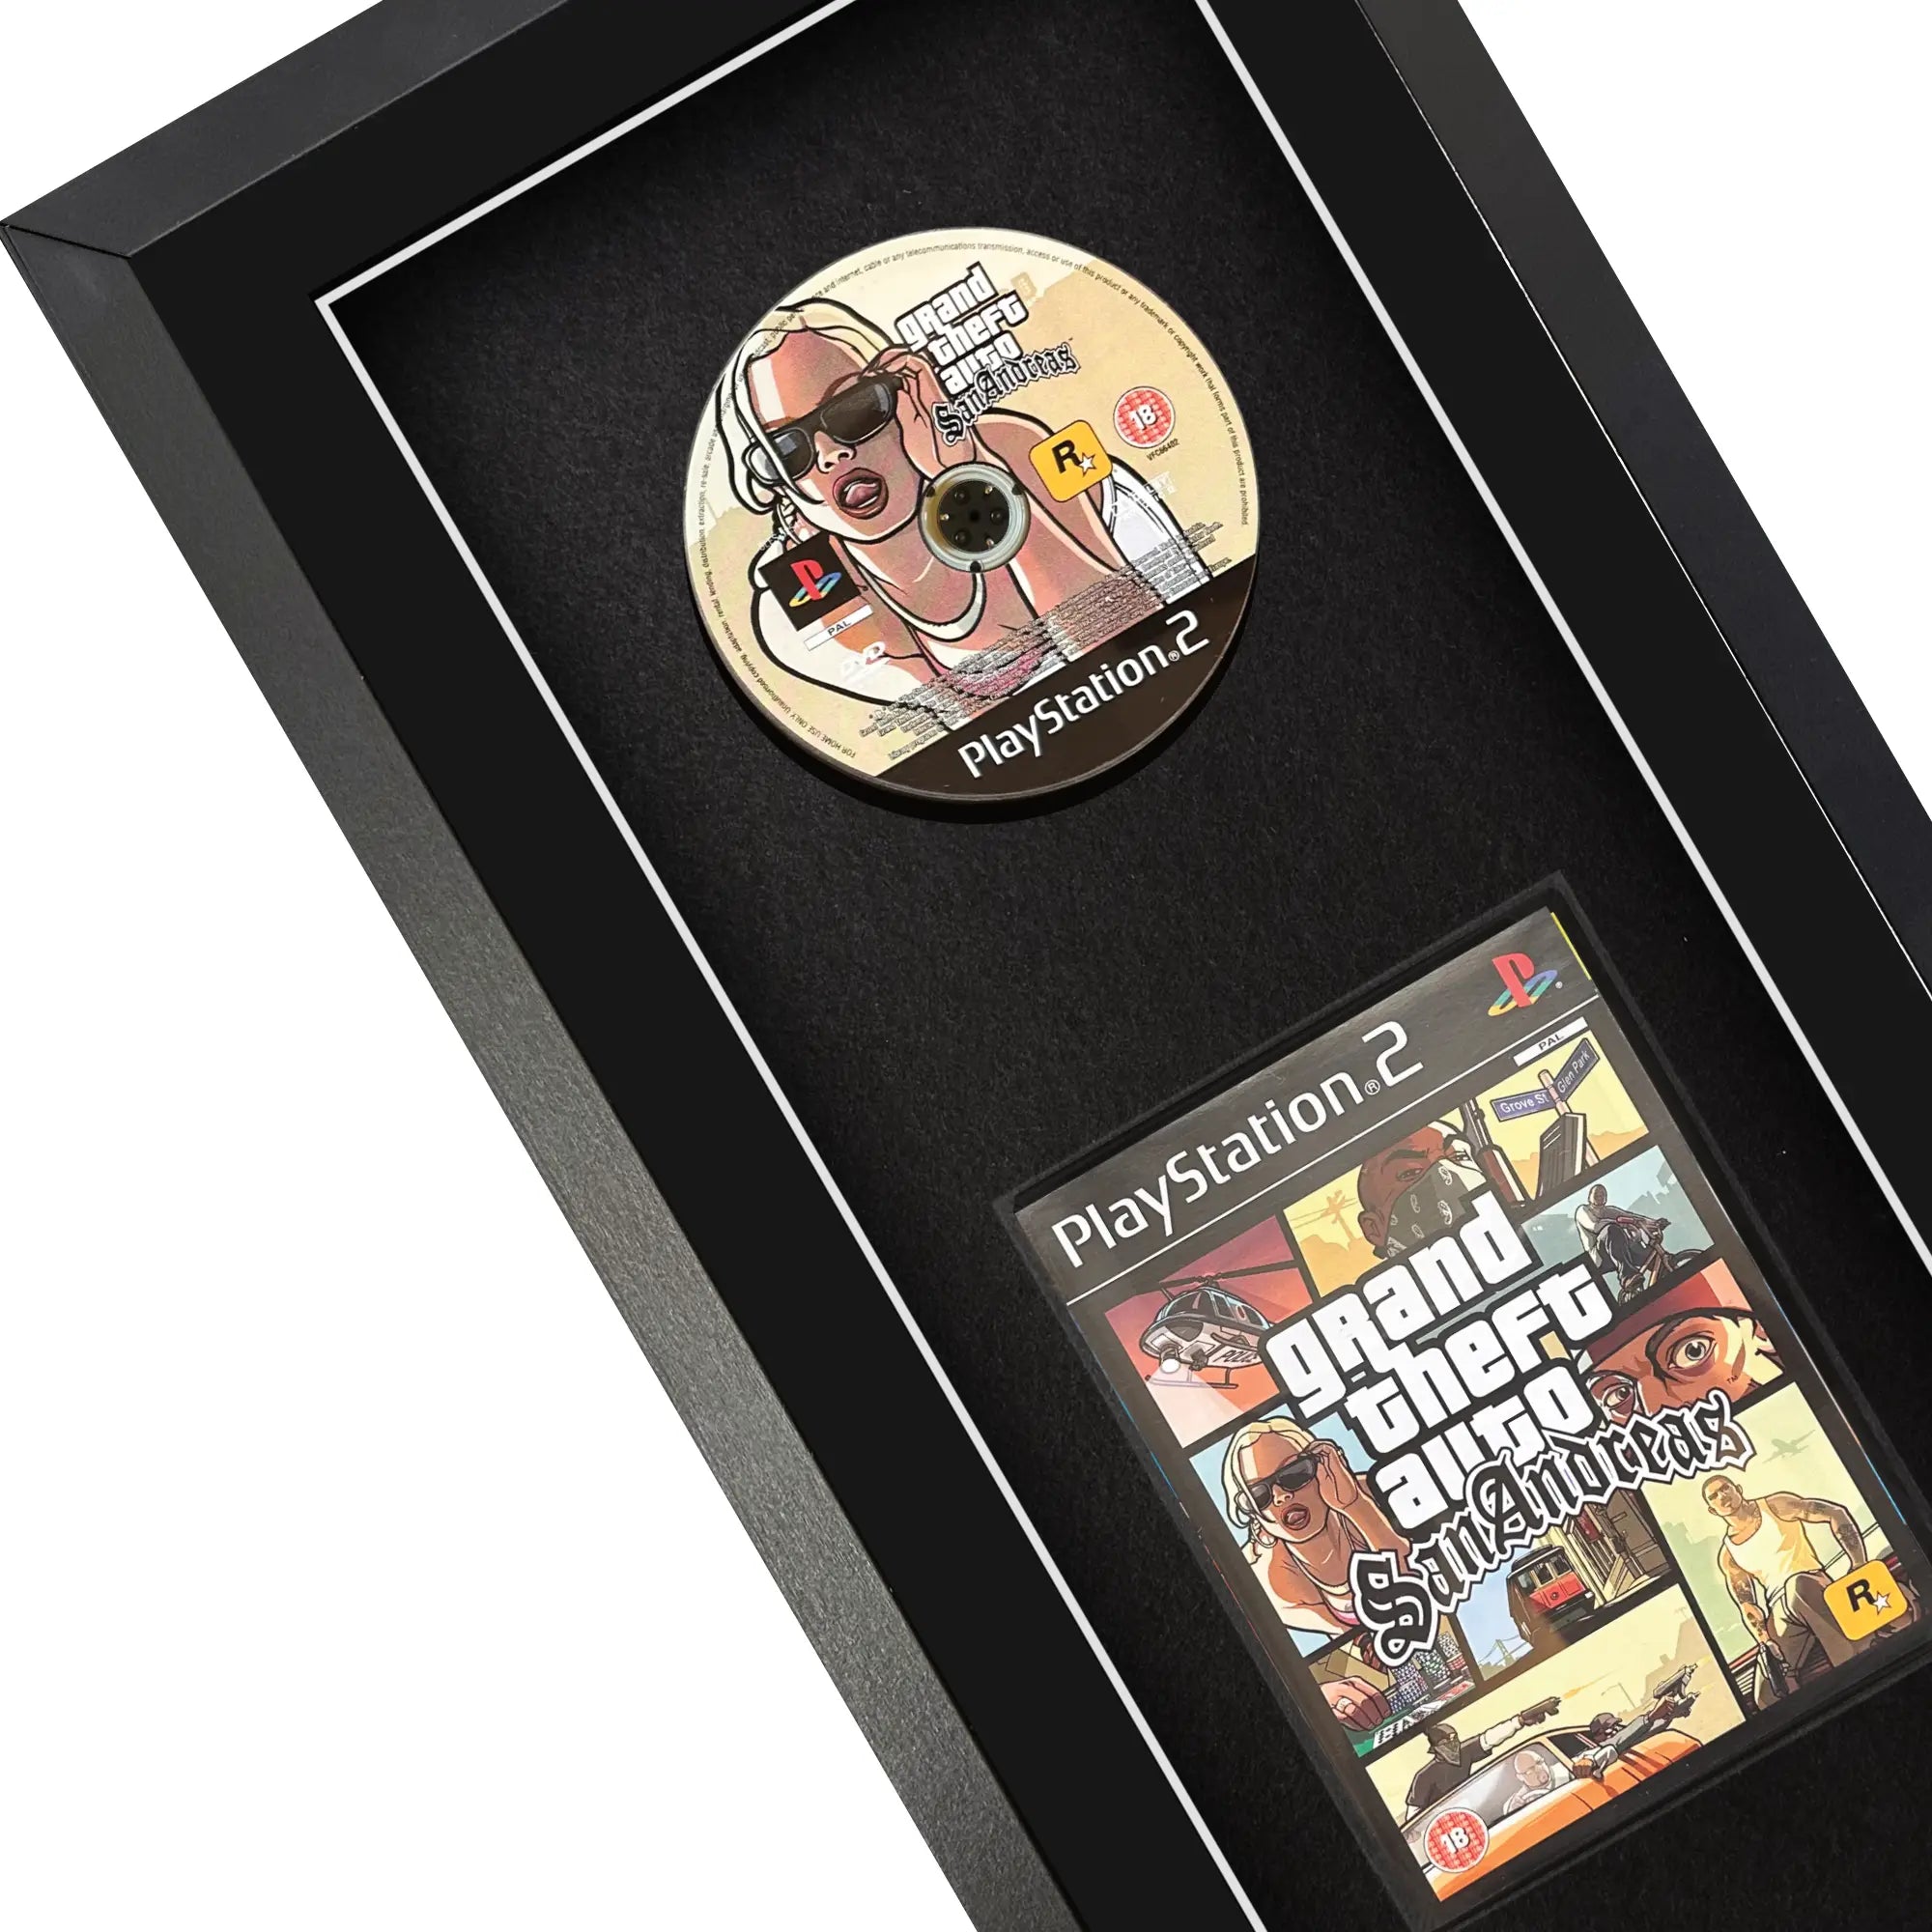 Frame your own PlayStation 2 game to be displayed within this frame, the perfect way to showcase your game